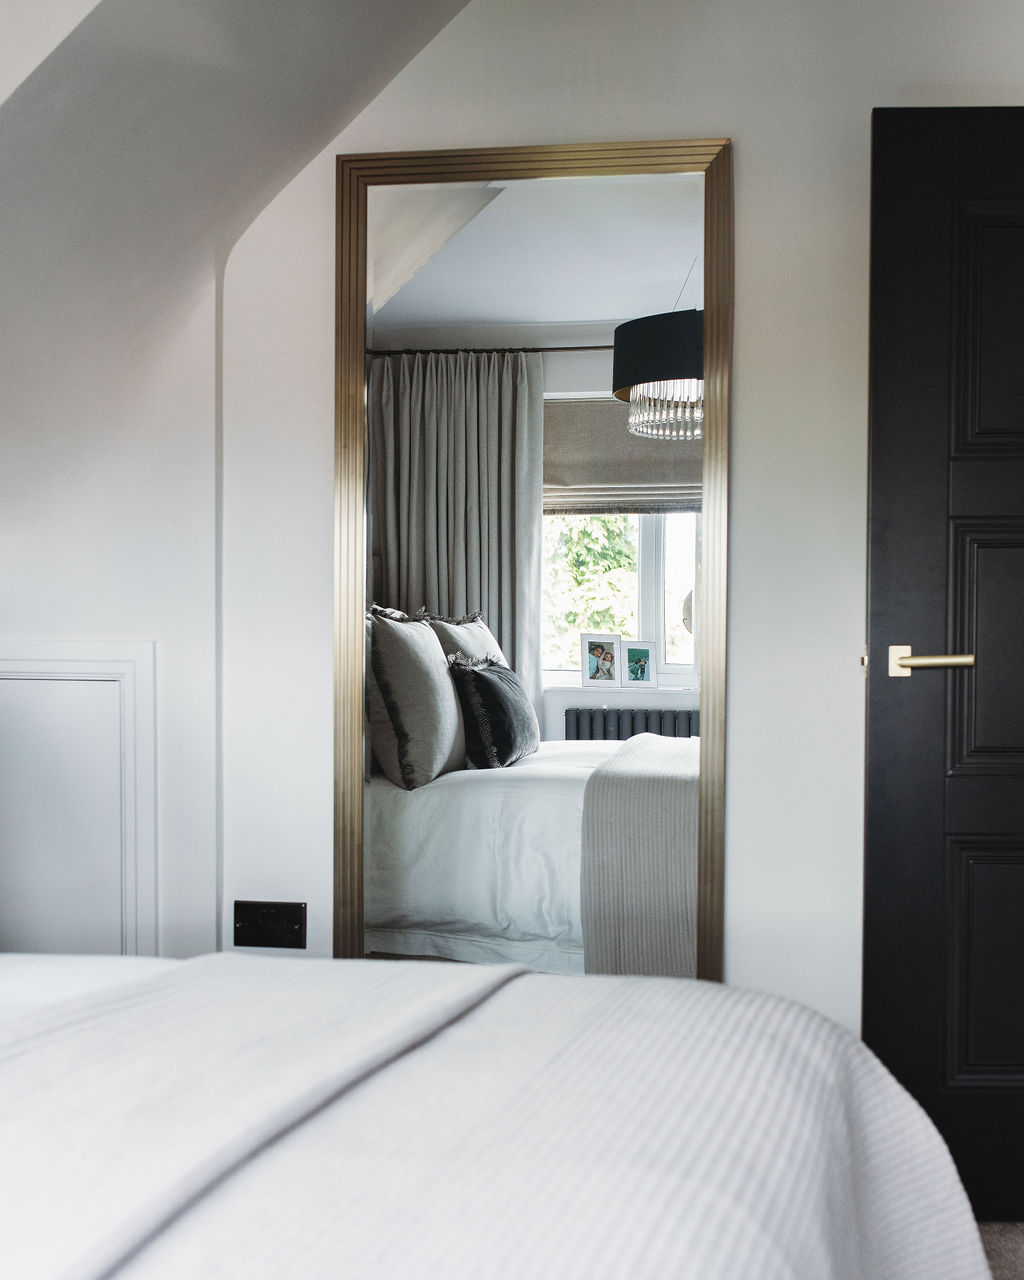 interior design case study image shows a master bedroom reflected in a gold mirror